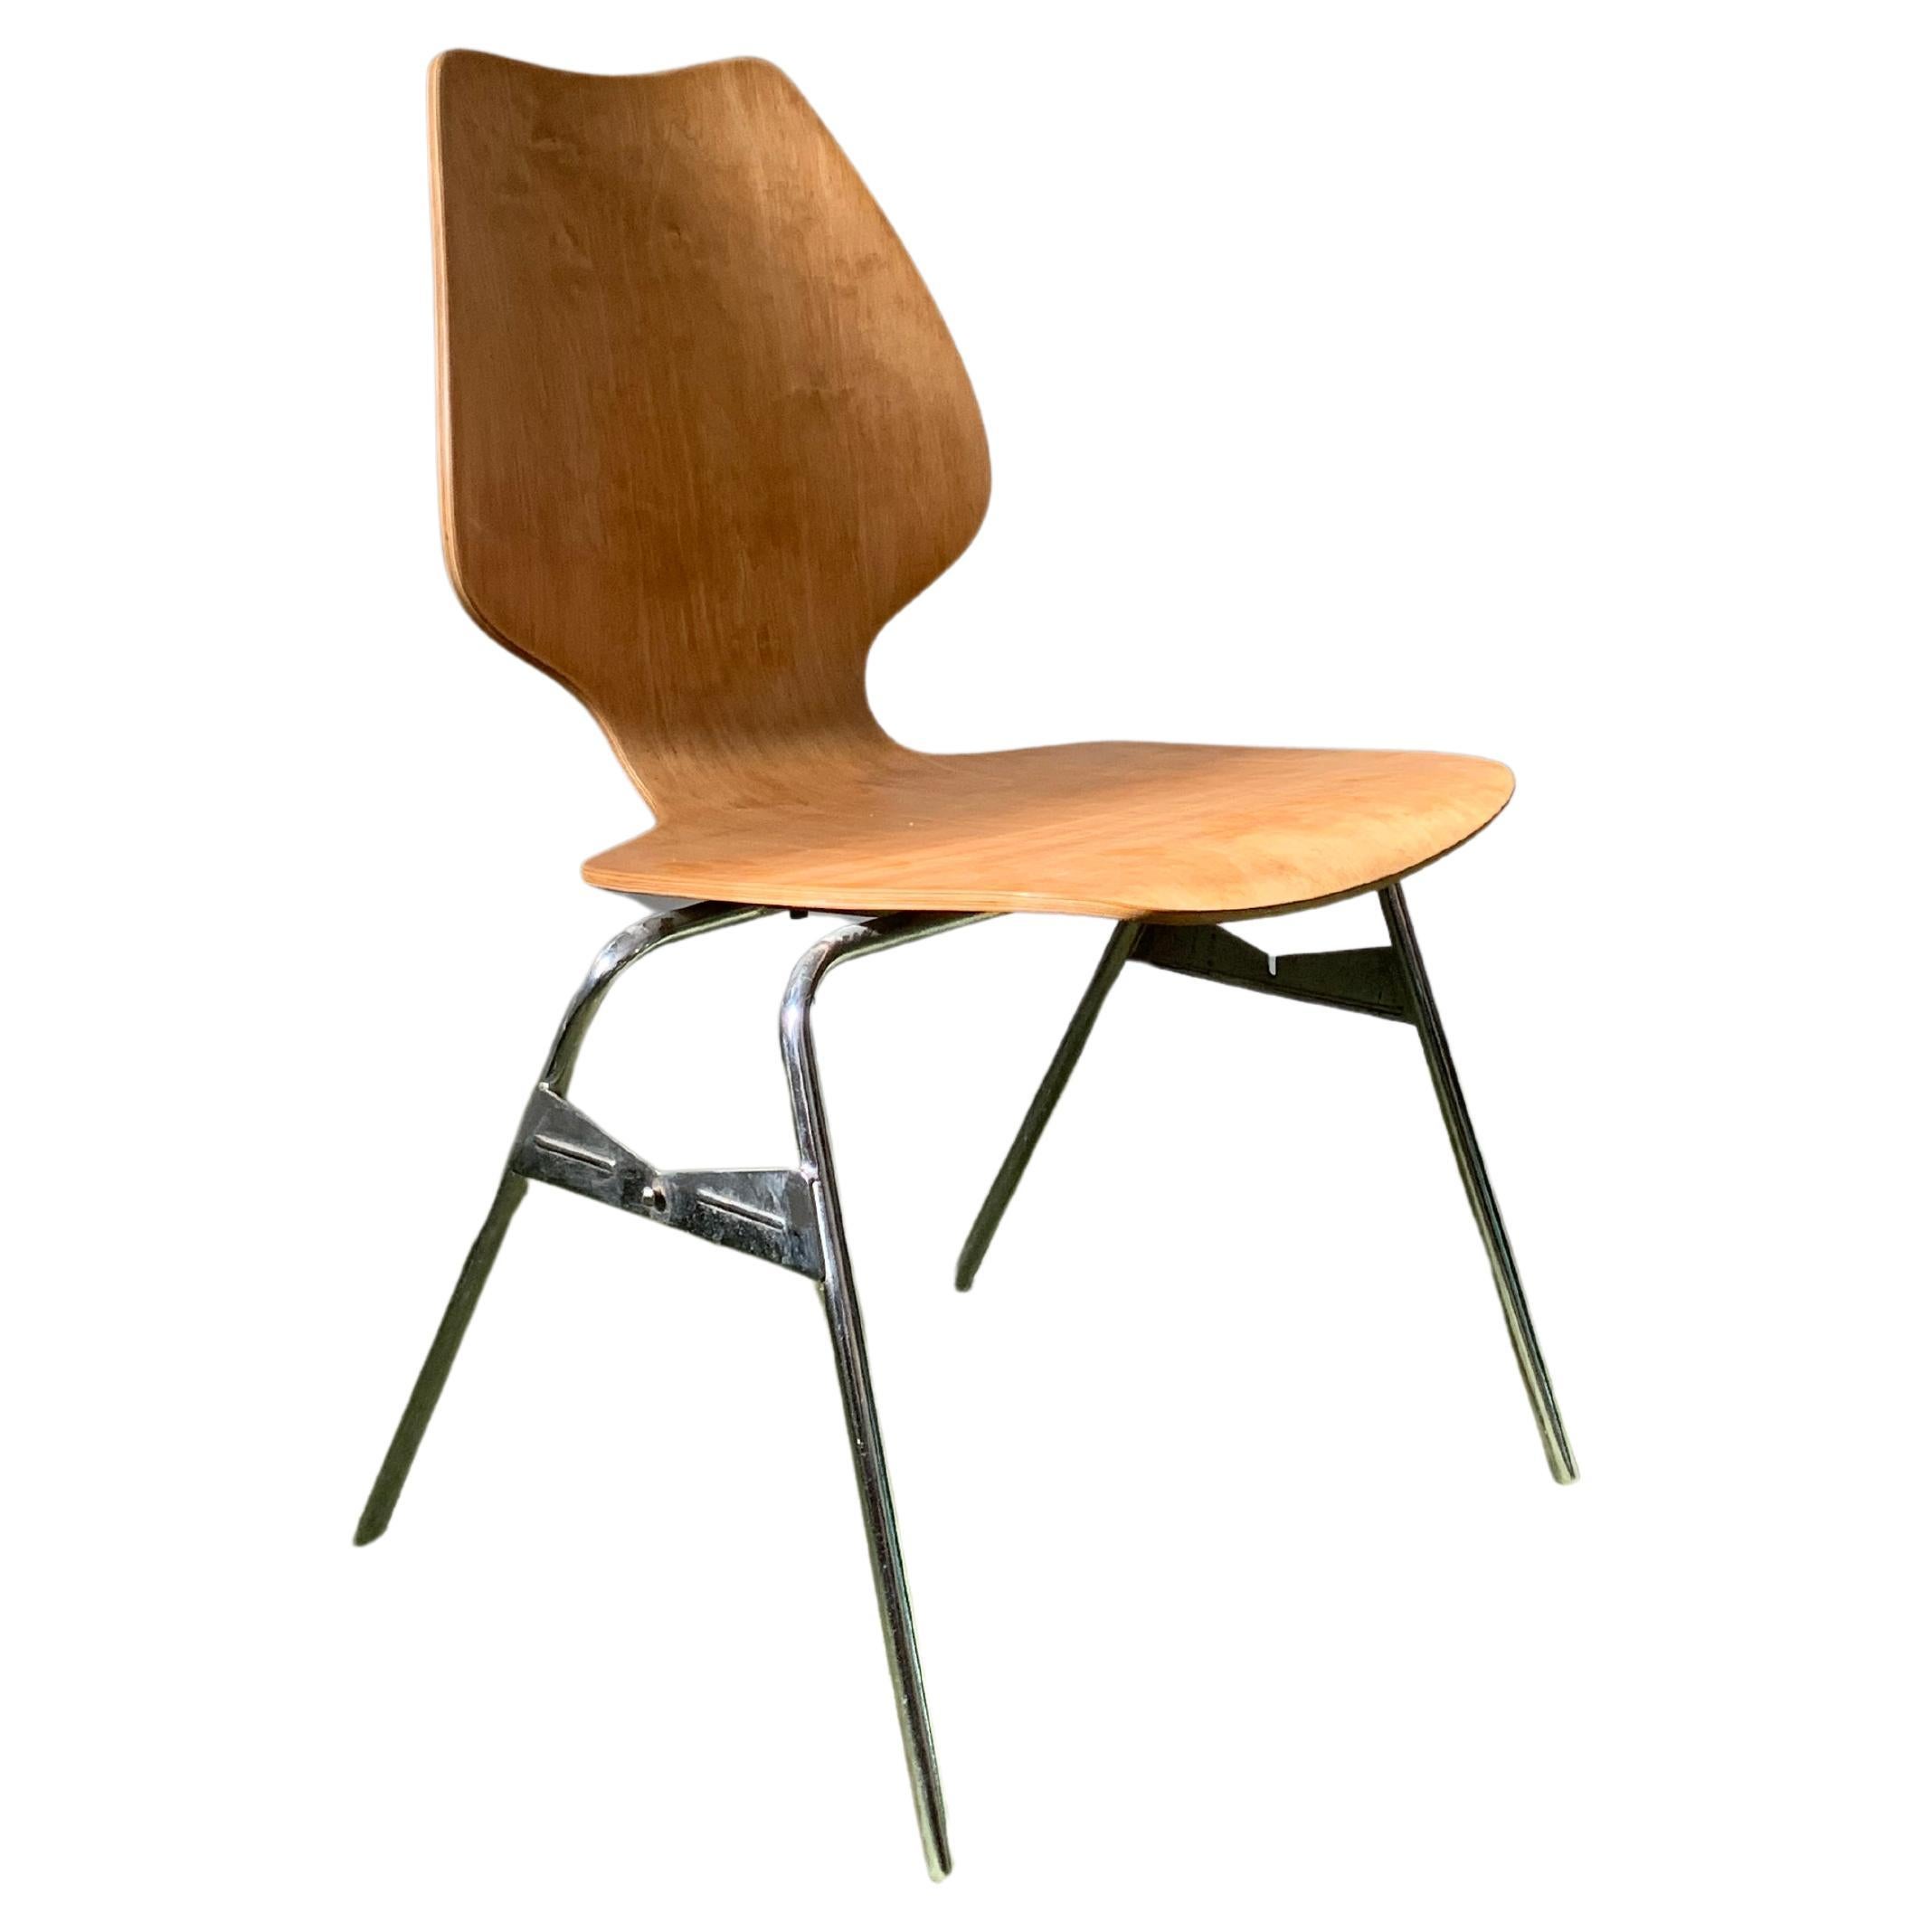 Vintage Swiss Industrial  Design Plywood Stacking Chair by Horgen Glarus 1960's For Sale